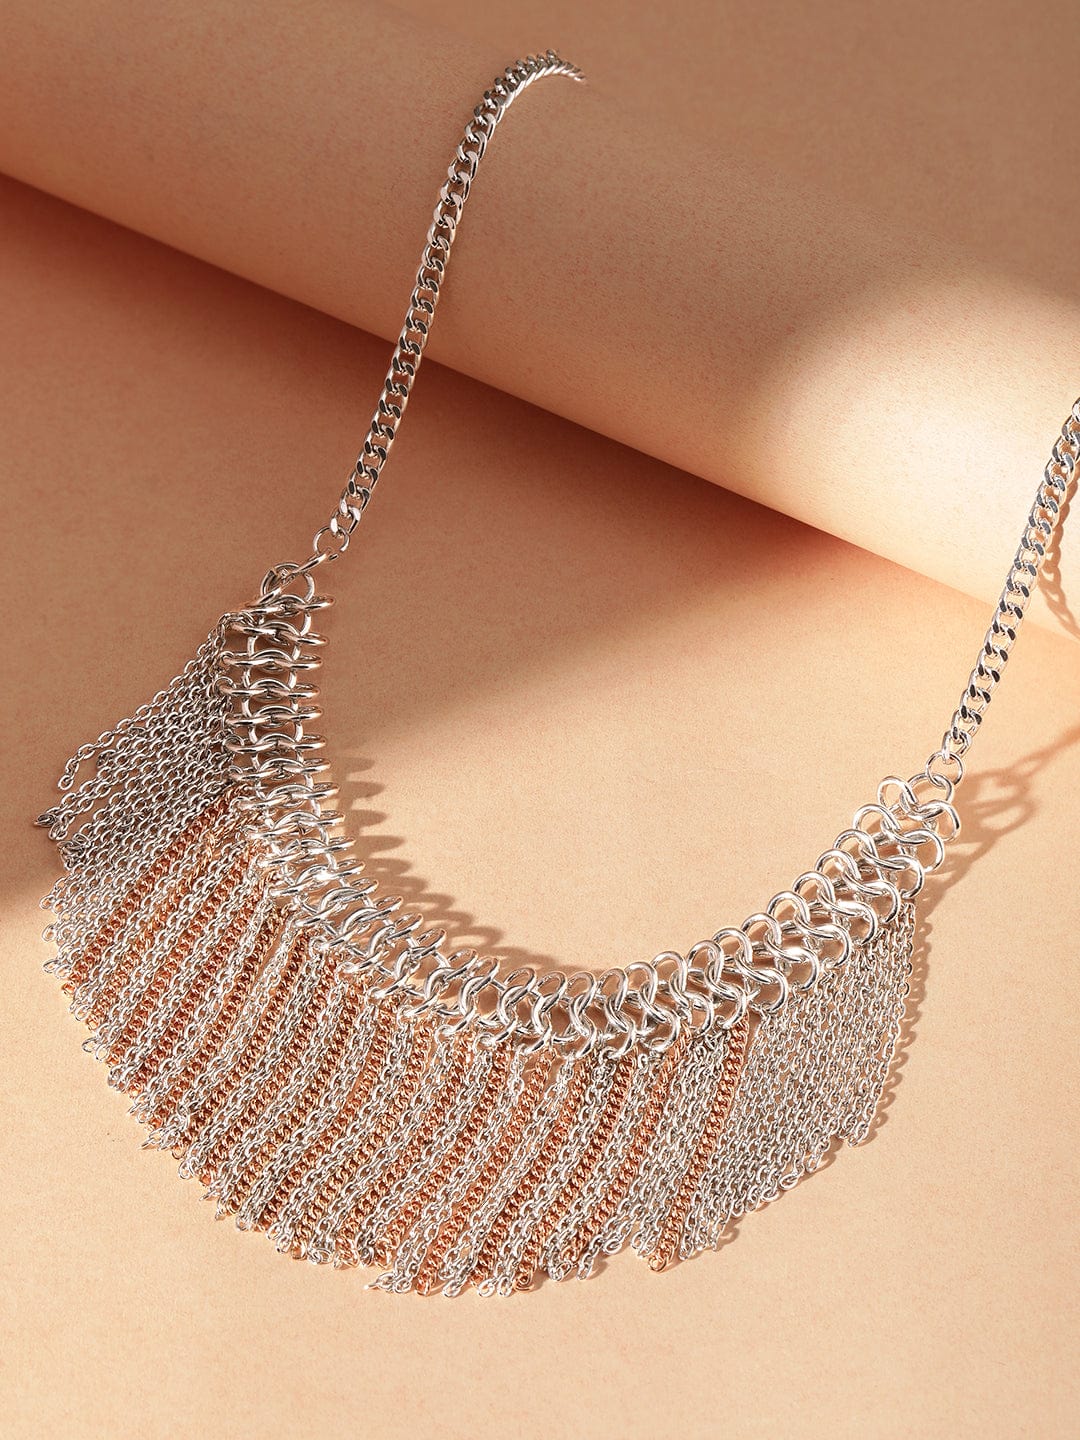 Rubans Voguish Rhodium plated & Rose Gold Link chain Tassels Necklace Necklace